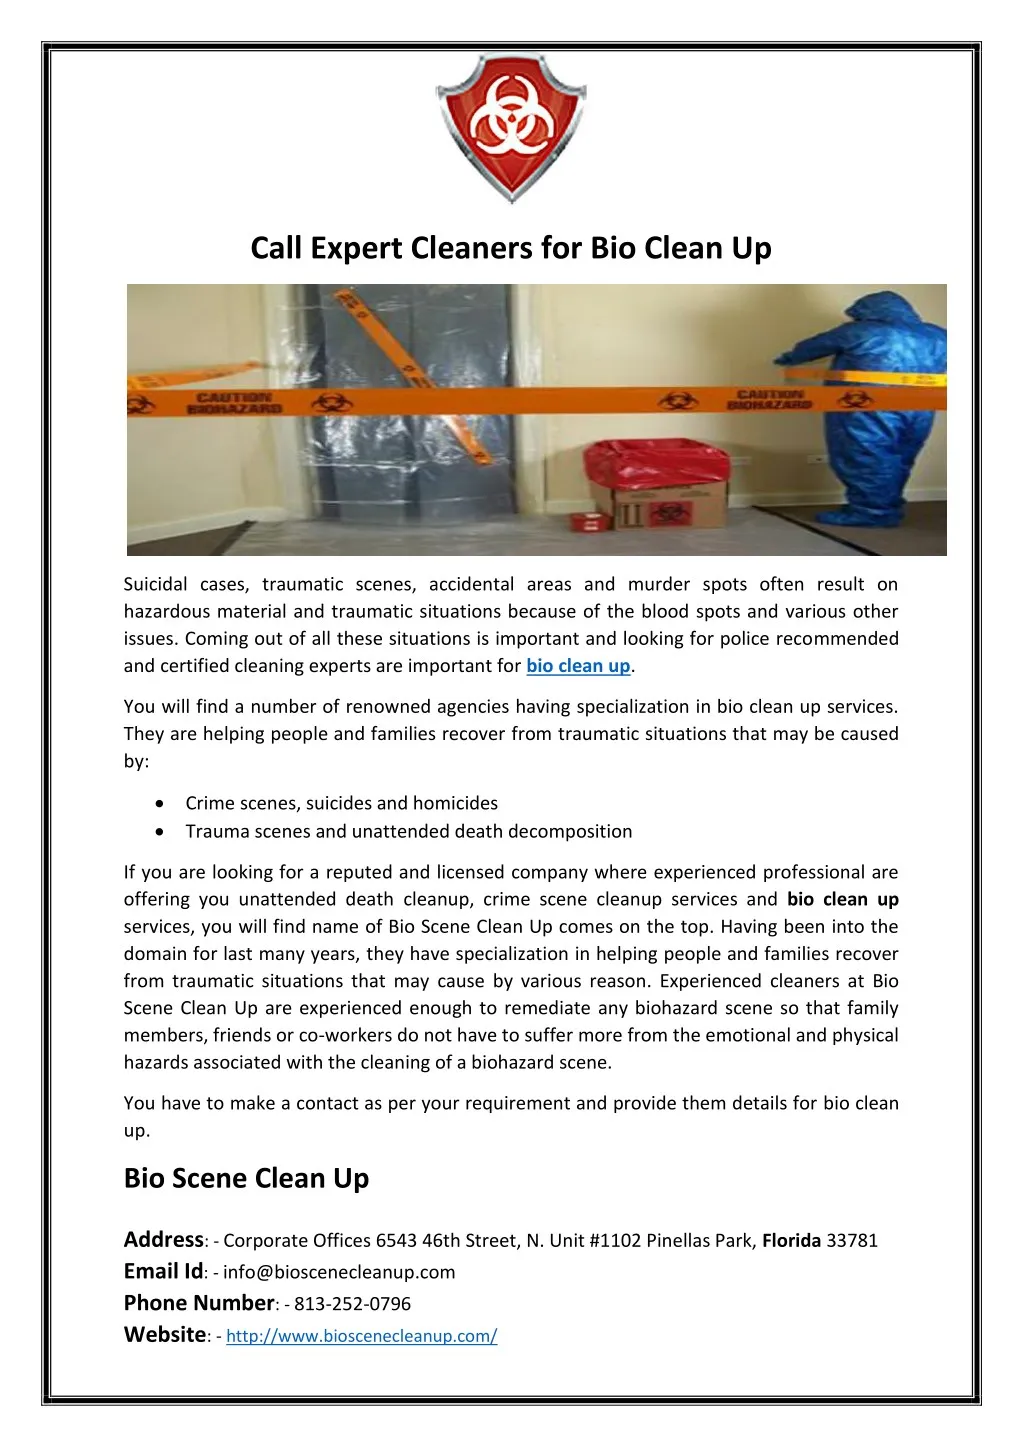 call expert cleaners for bio clean up